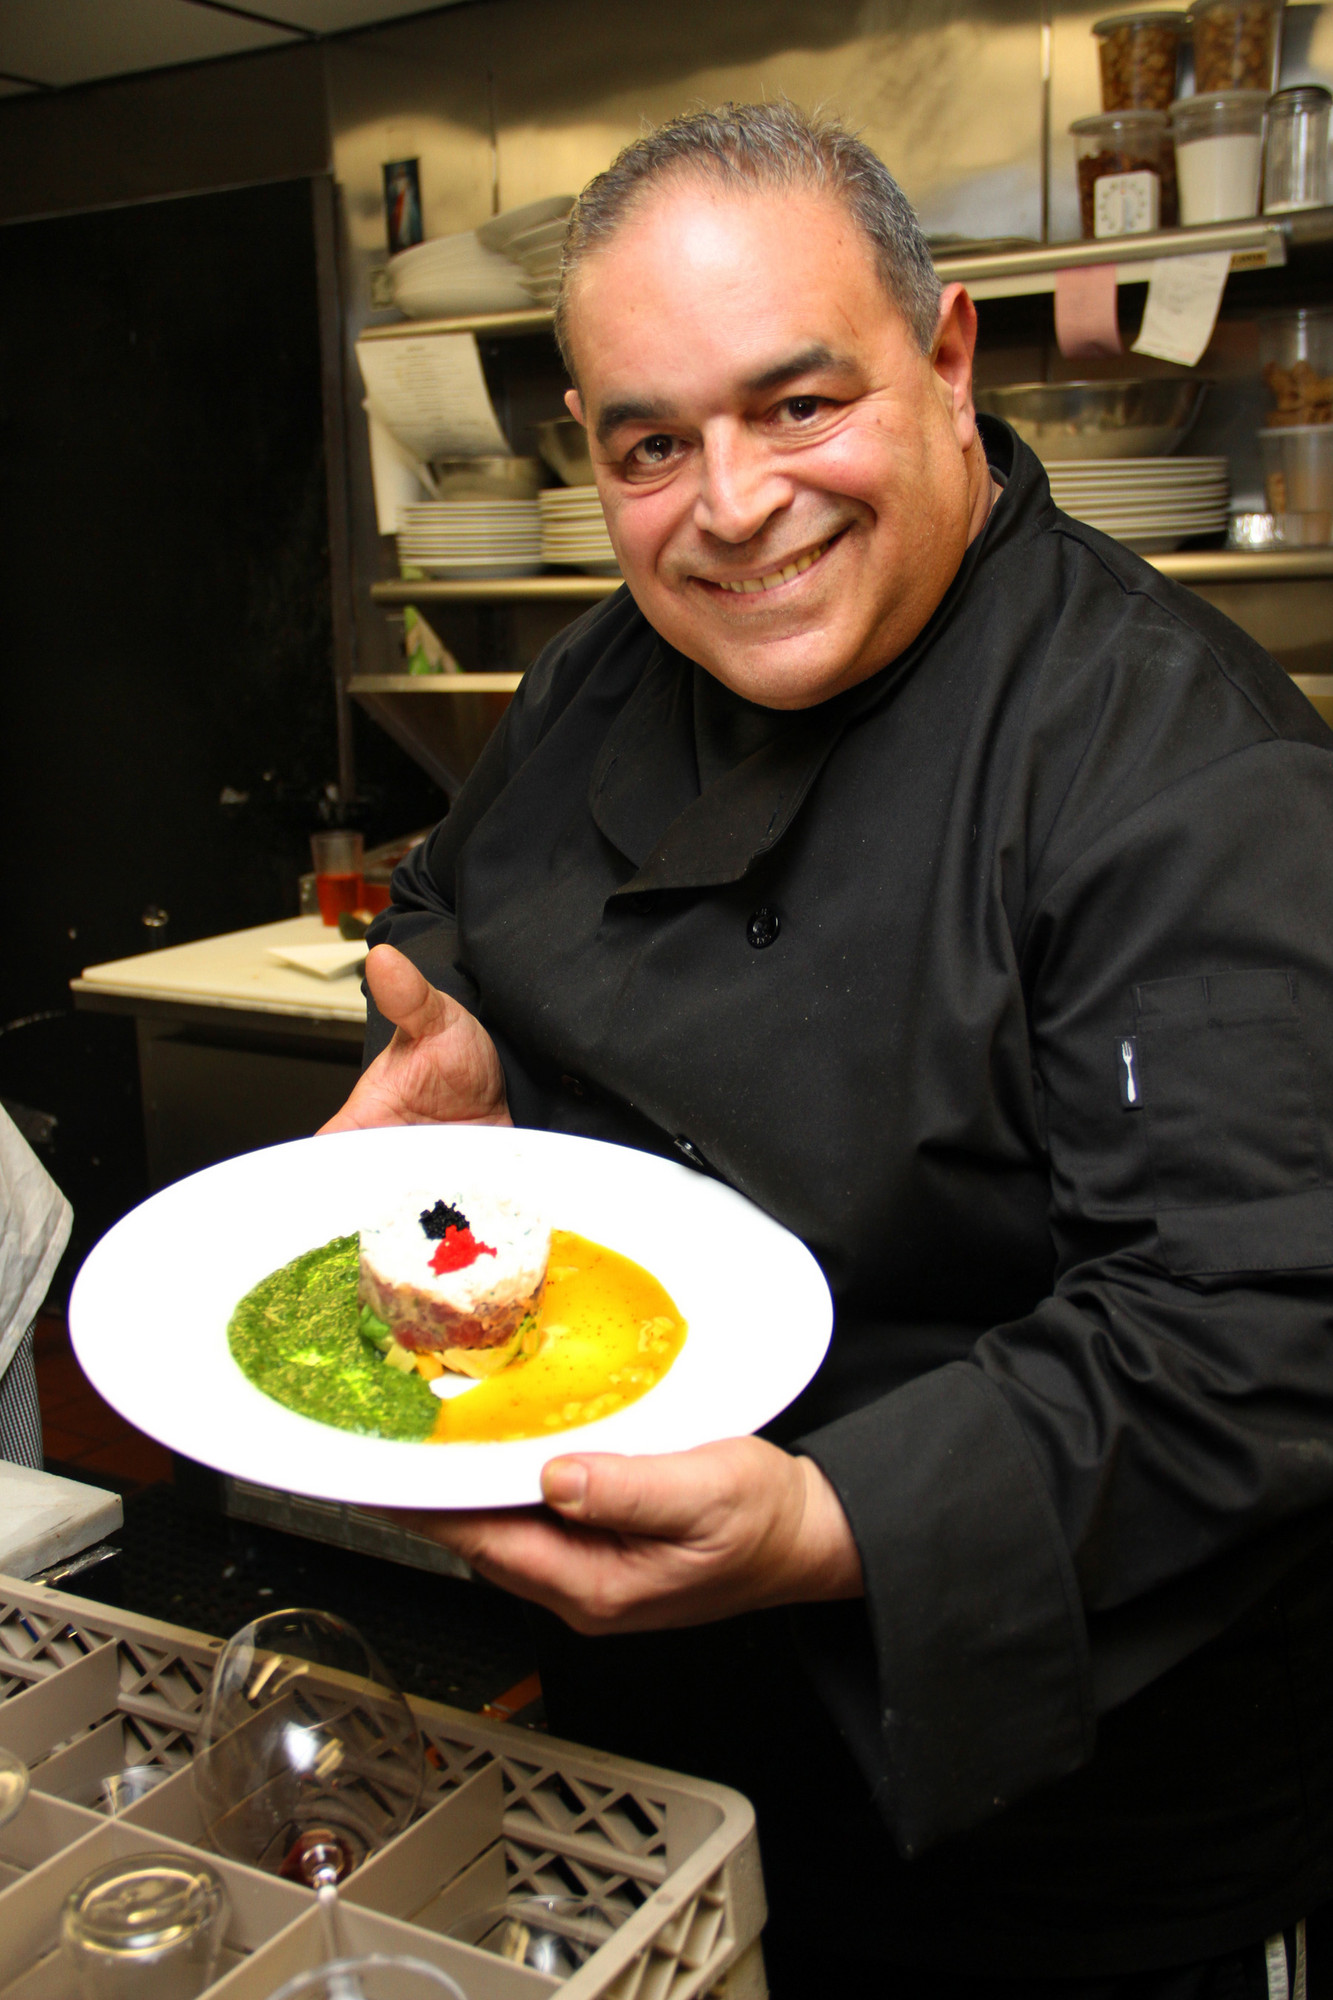 Joe Gannascoli with one of his delicious dishes.